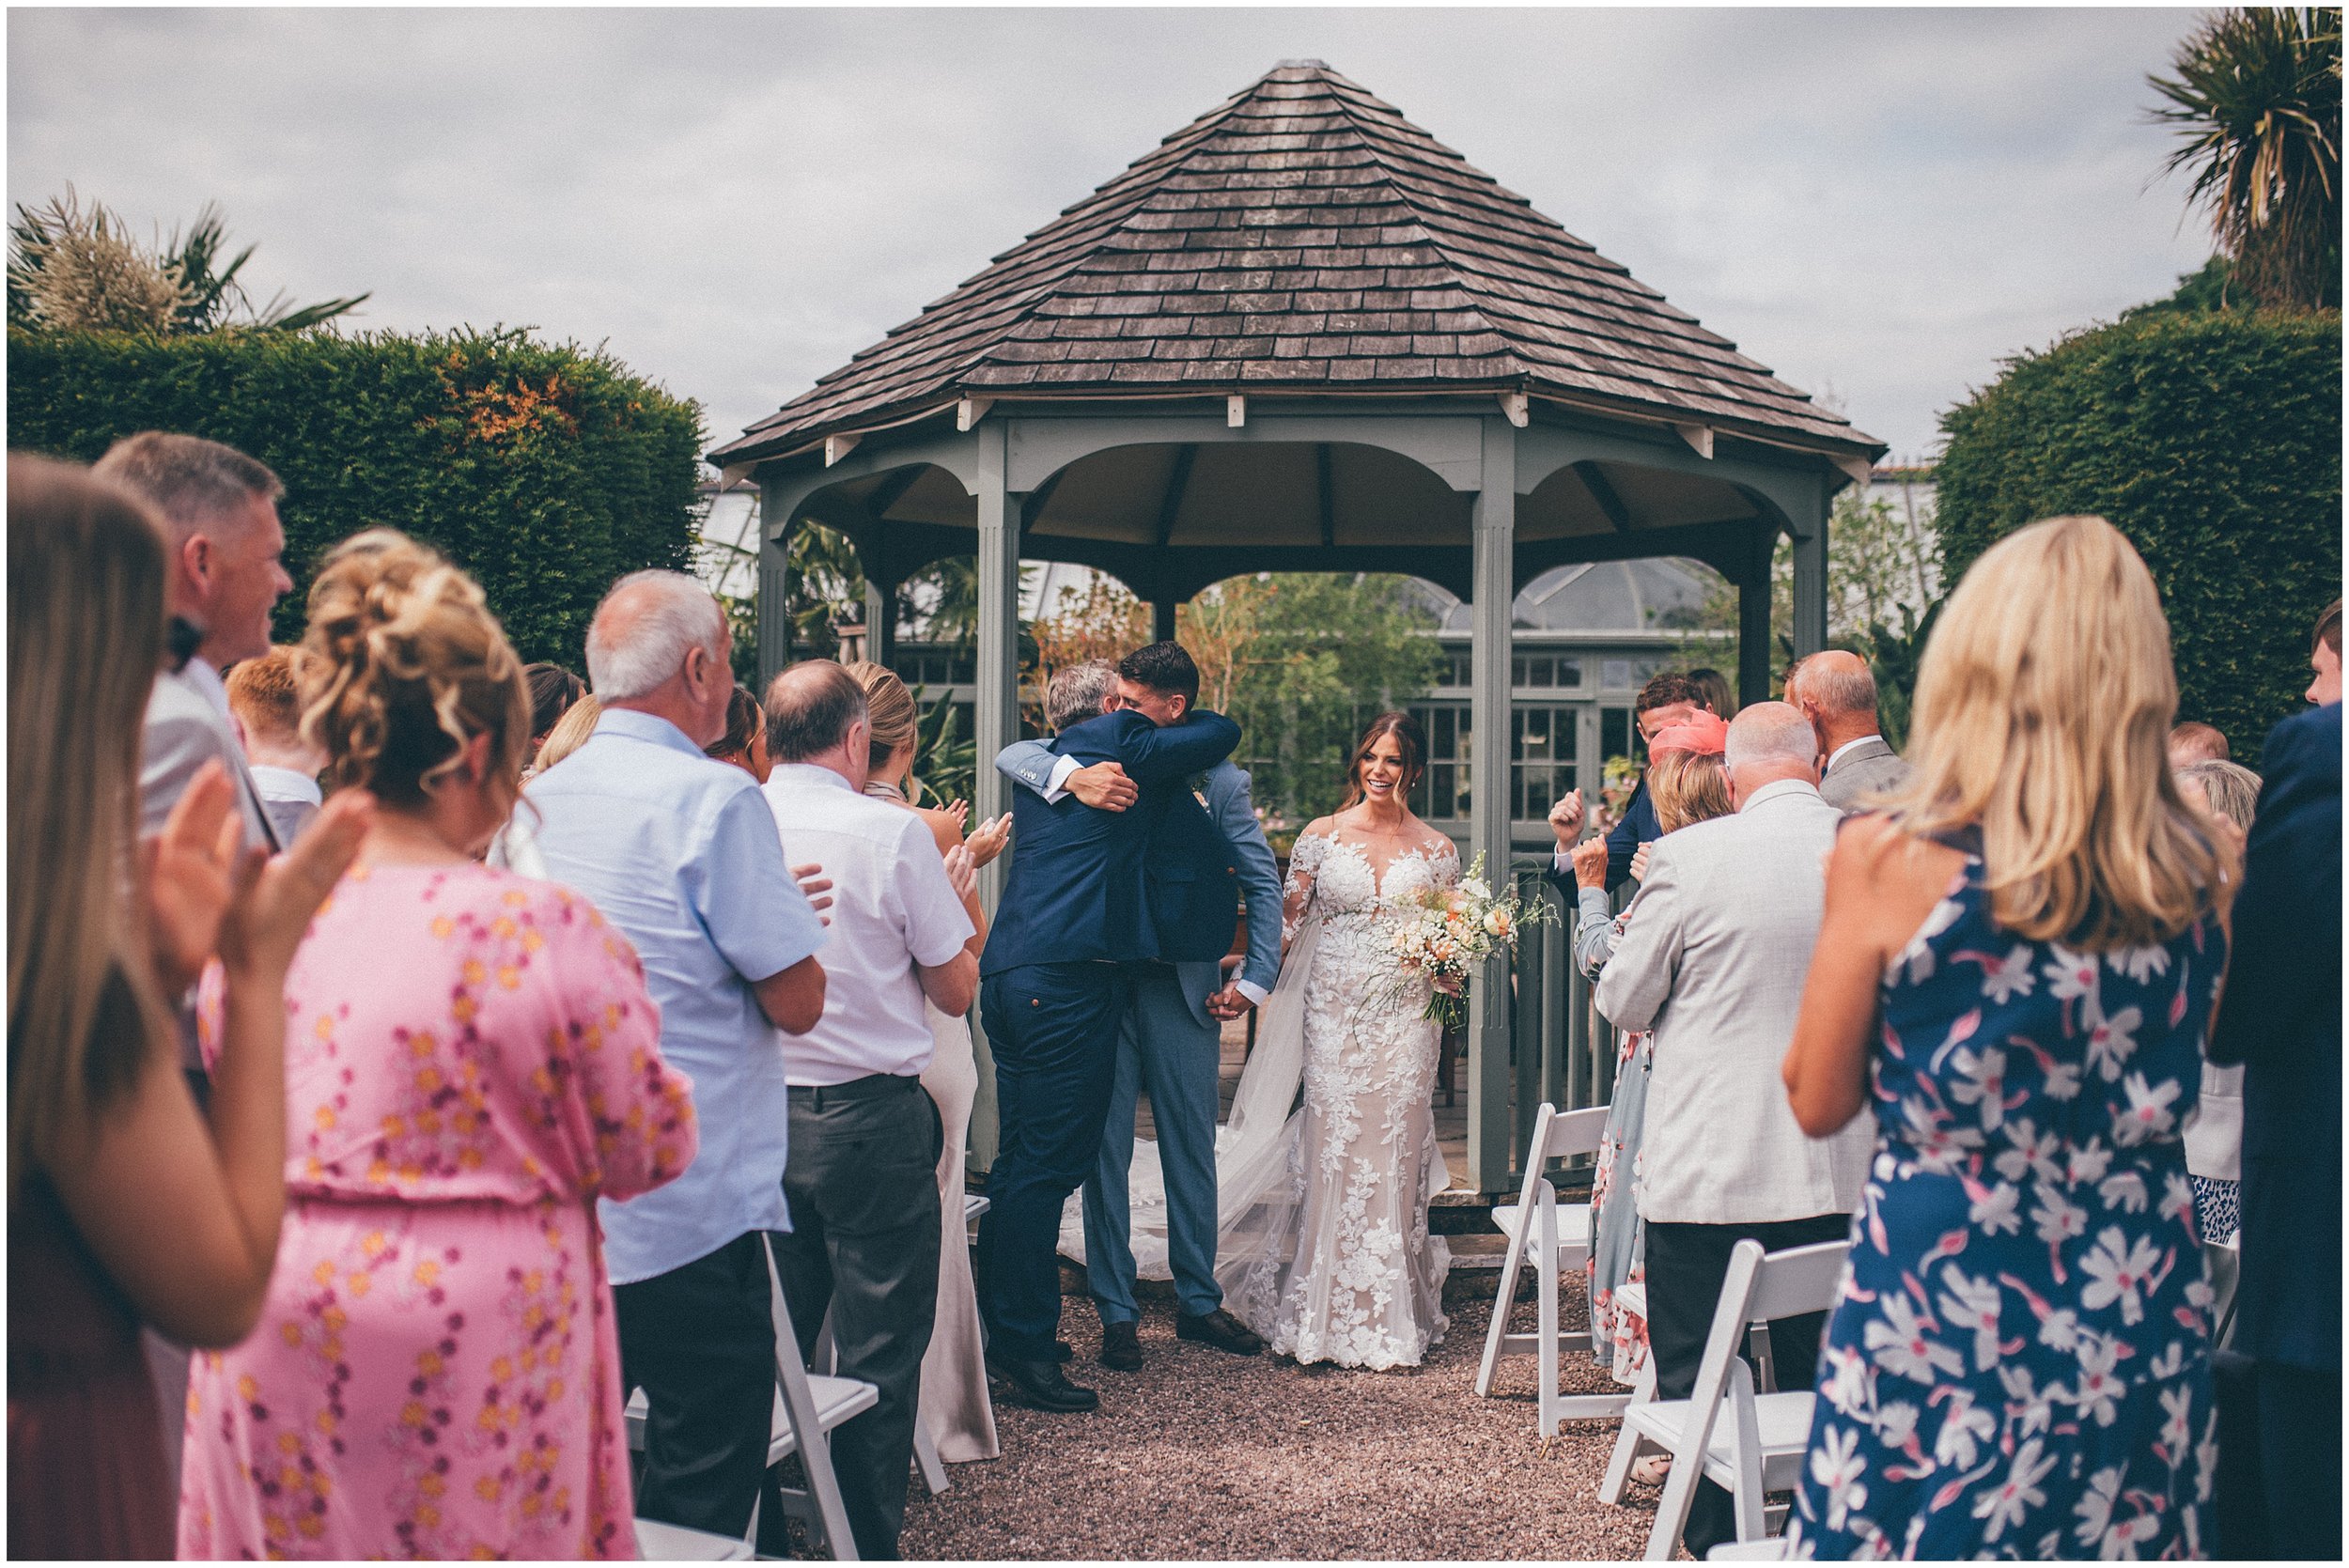 Bride and groom have an outdoor wedding ceremony in Cheshire at Abbeywood Estate wedding venue in Delamere.